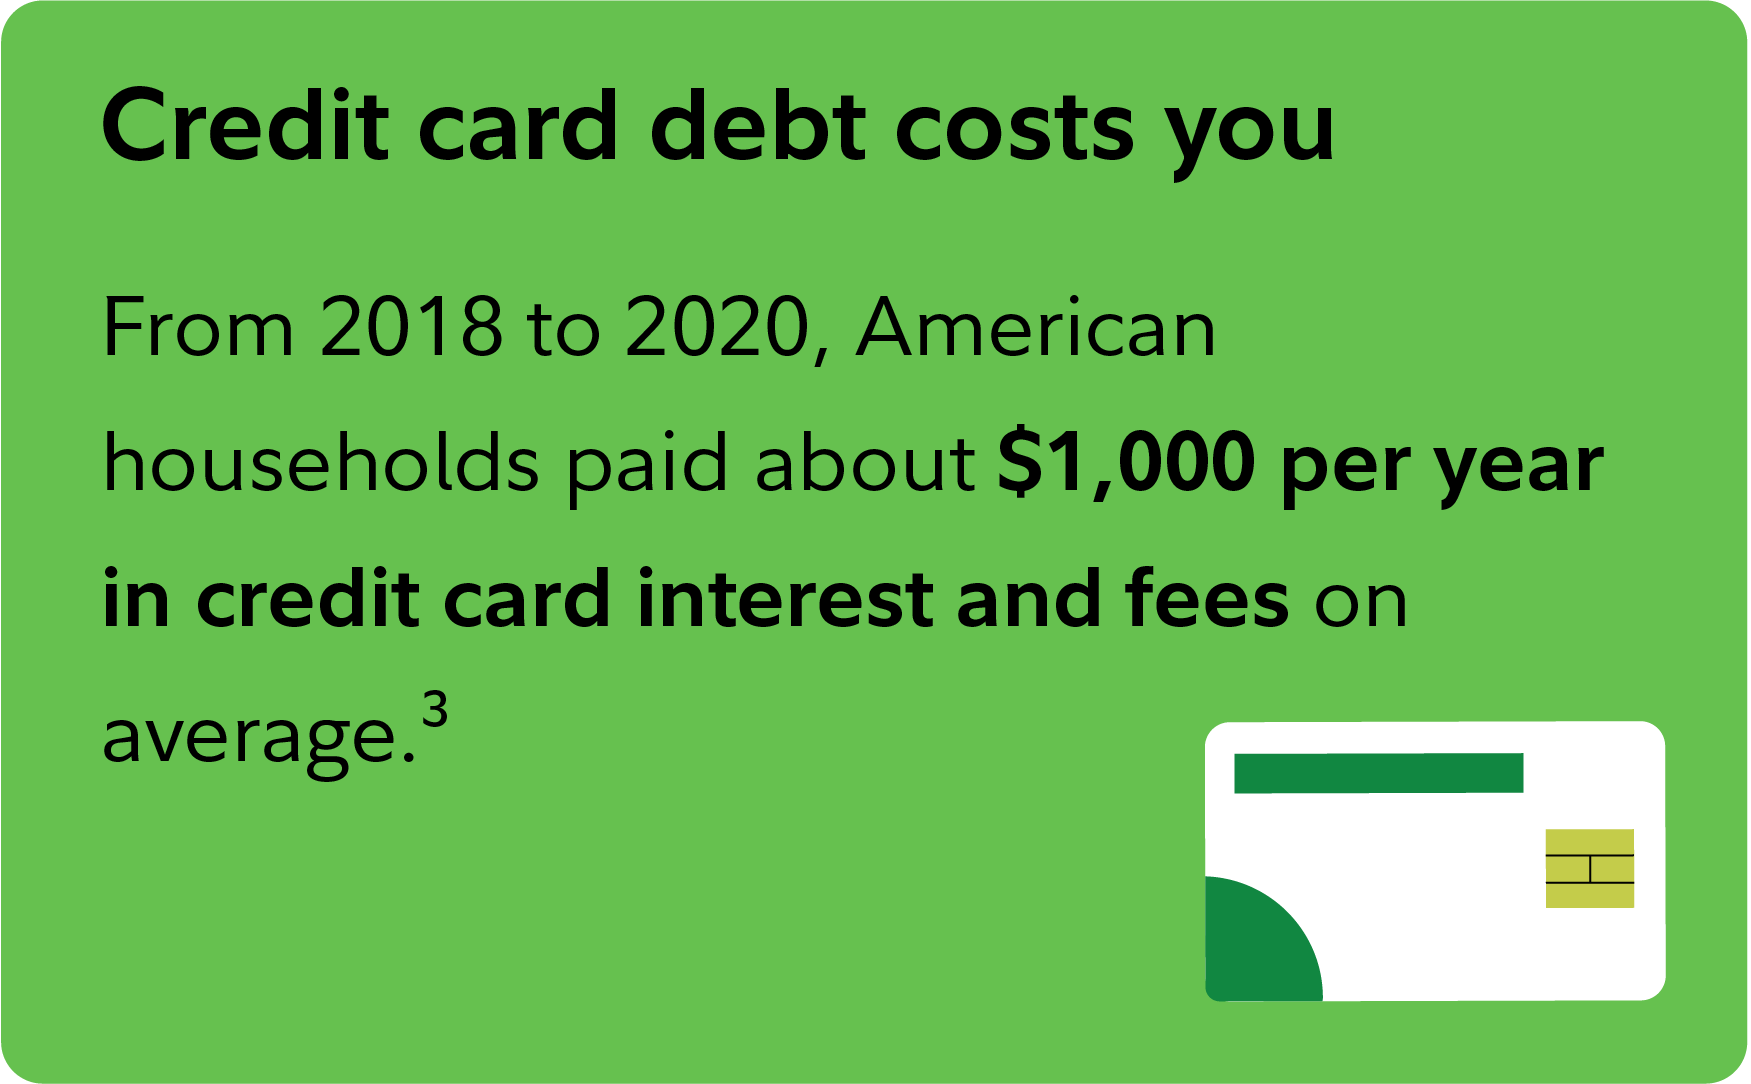 Credit card debt costs you On average, American households paid about $1,000 per year in credit card interest and fees from 2018 to 2020. See footnote 3 in complementary region.